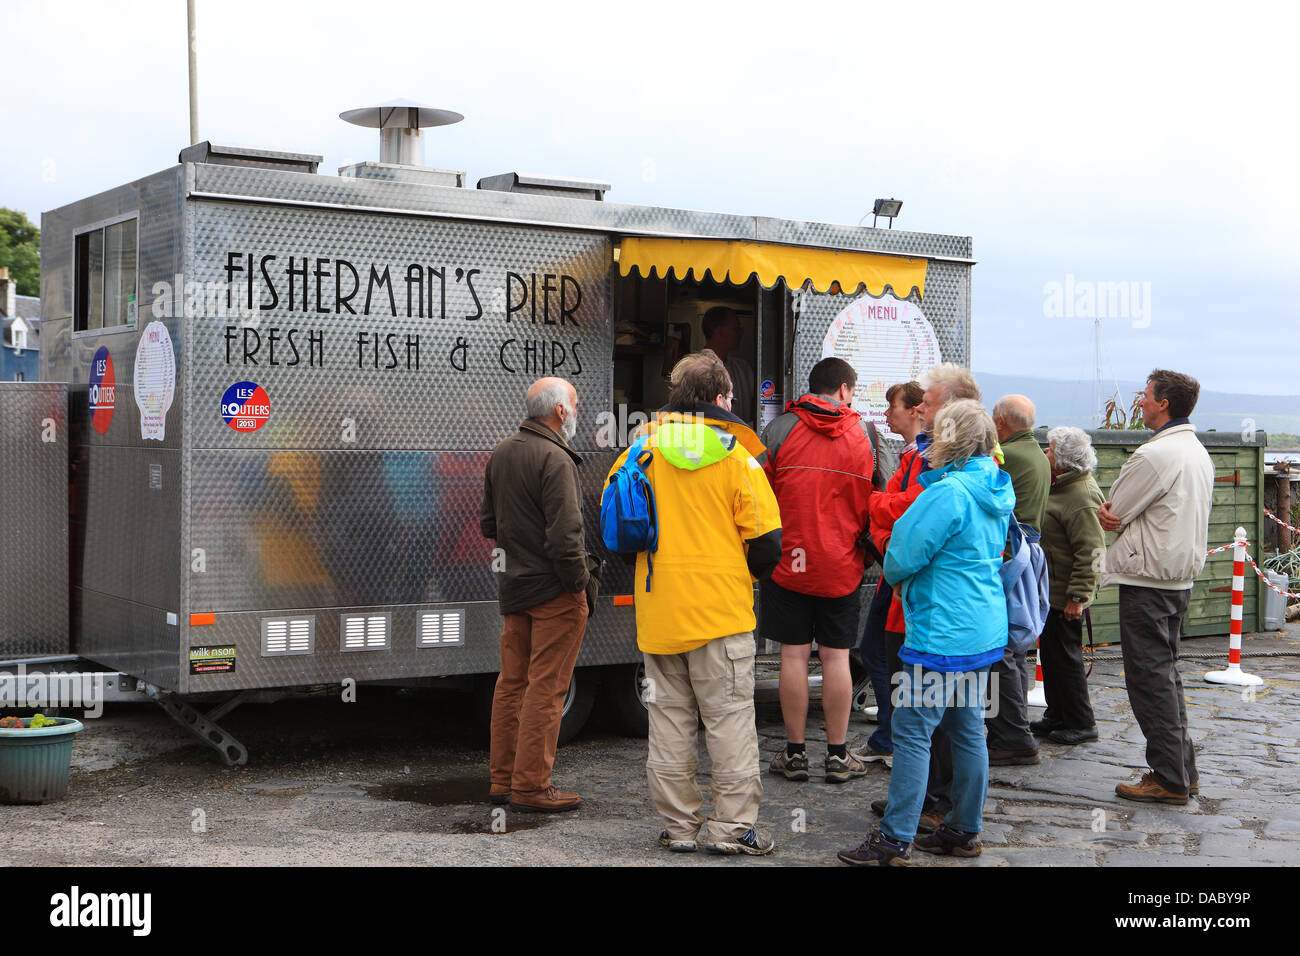 Tourists buying fish & chips from the award winning 'Les Routiers' Fisherman's Pier van in Tobermory Isle of Mull Stock Photo